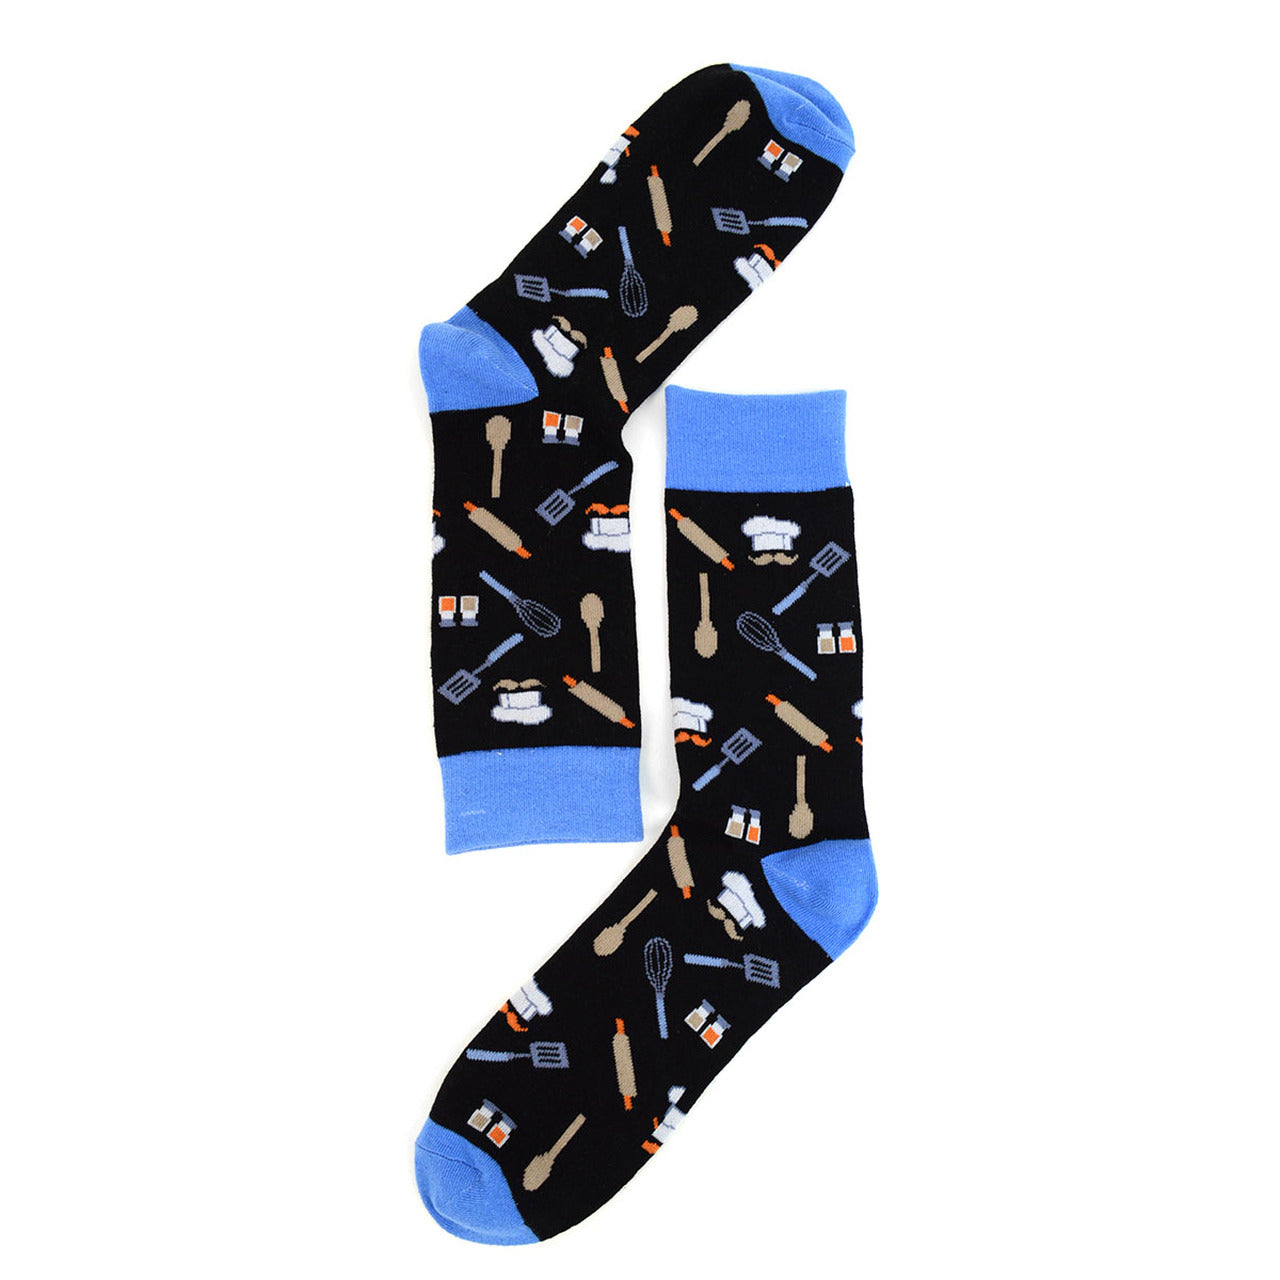 Fun Socks Men's Cook Chef Novelty Socks Black and Blue Cooking Lovers Restaurant Owner Gifts